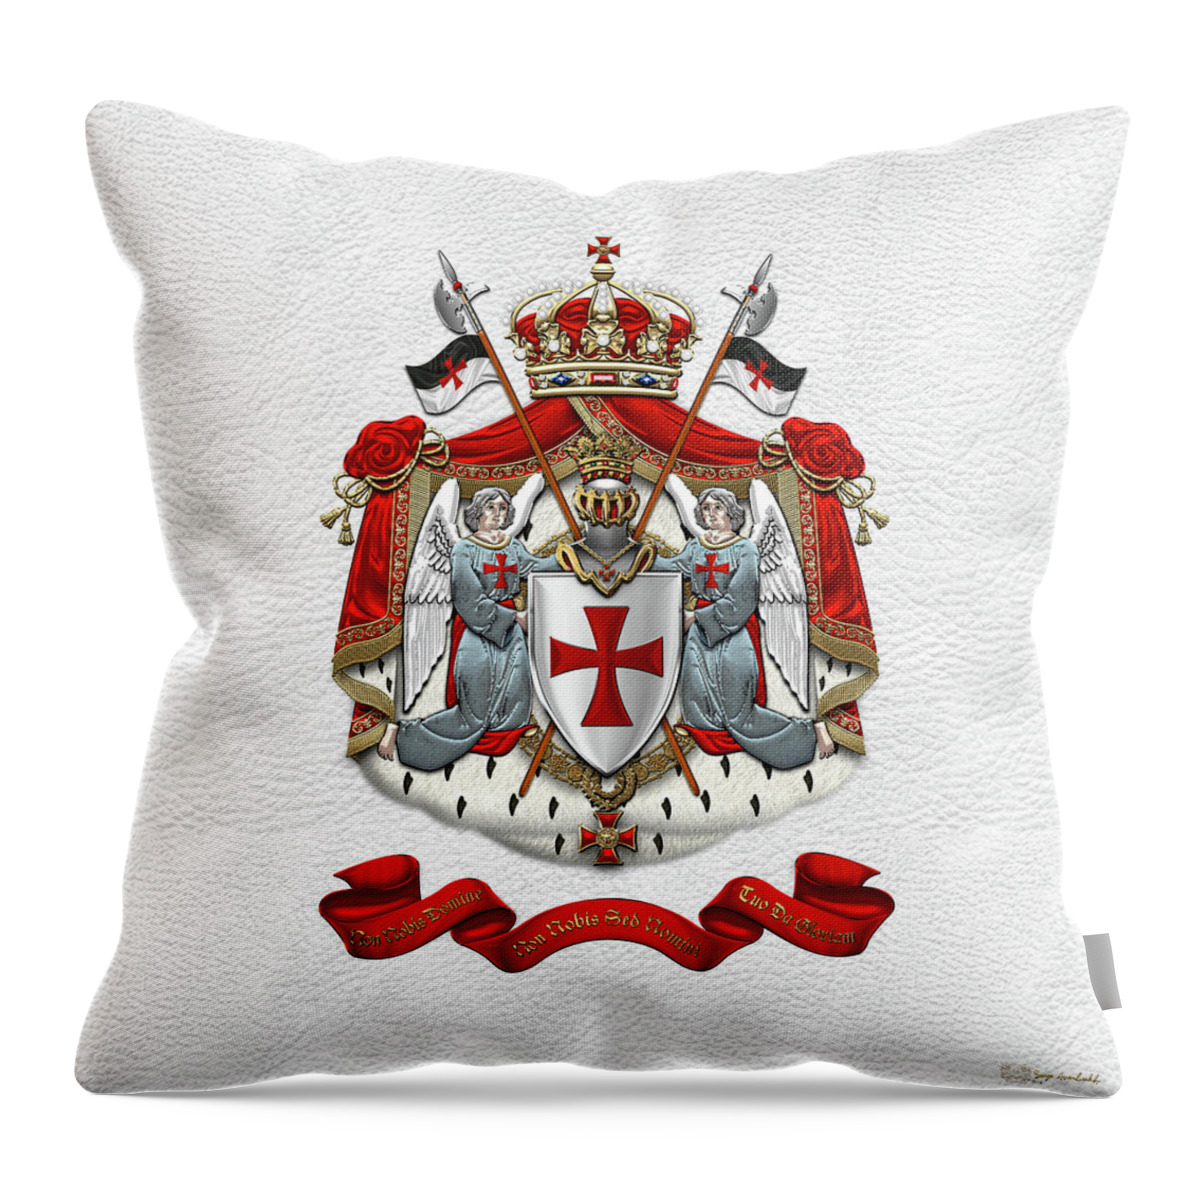 'ancient Brotherhoods' Collection By Serge Averbukh Throw Pillow featuring the digital art Knights Templar - Coat of Arms over White Leather by Serge Averbukh